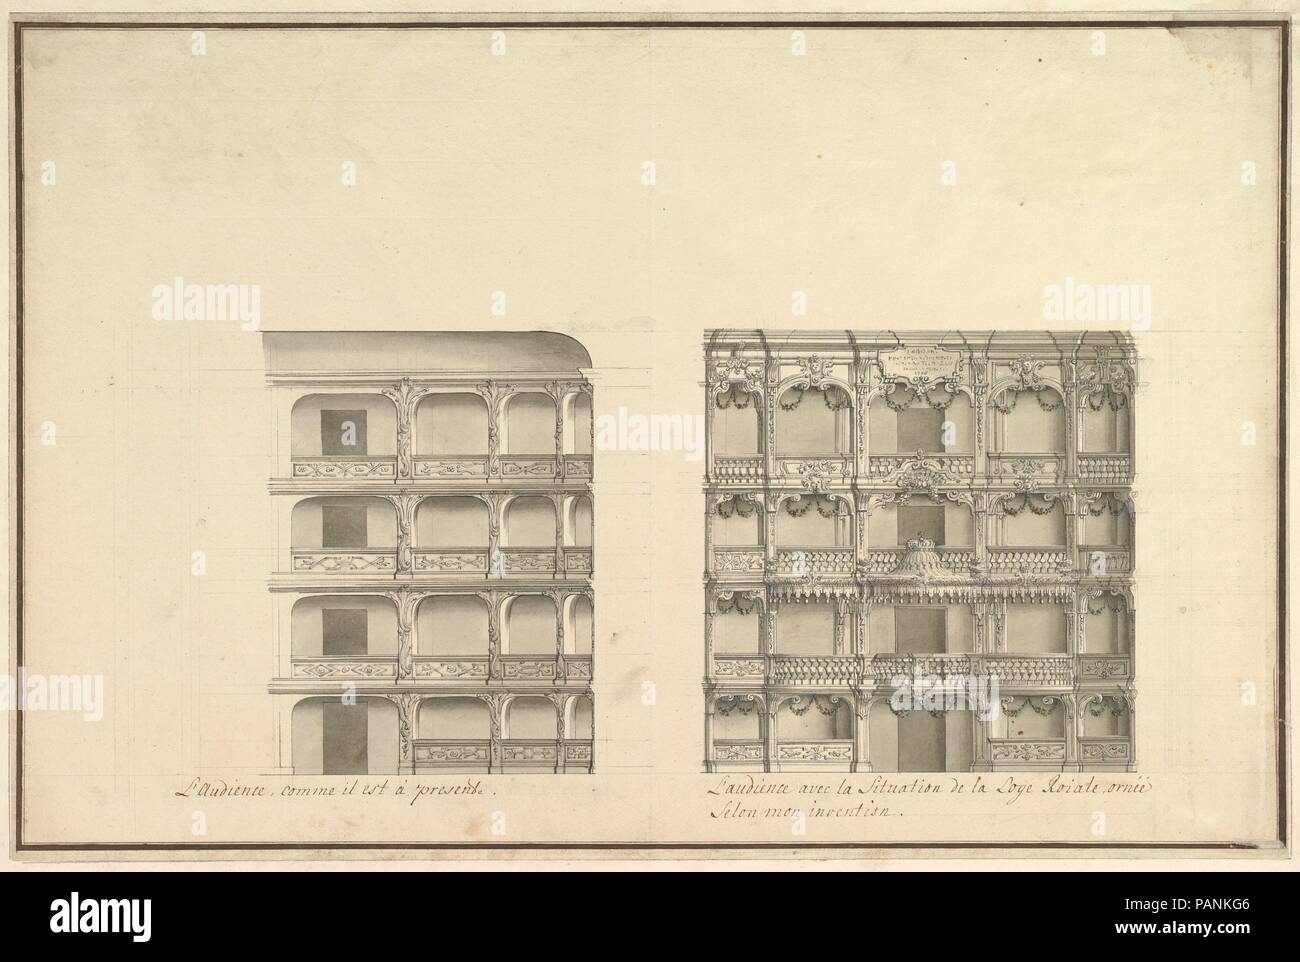 Elevation of Boxes and Royal Box as Presently Constituted and According to New Design. Artist: Workshop of Giuseppe Galli Bibiena (Italian, Parma 1696-1756 Berlin). Dimensions: 16-1/8 x 24-3/8 in.  (41.0 x 61.9 cm). Date: ca. 1750. Museum: Metropolitan Museum of Art, New York, USA. Stock Photo